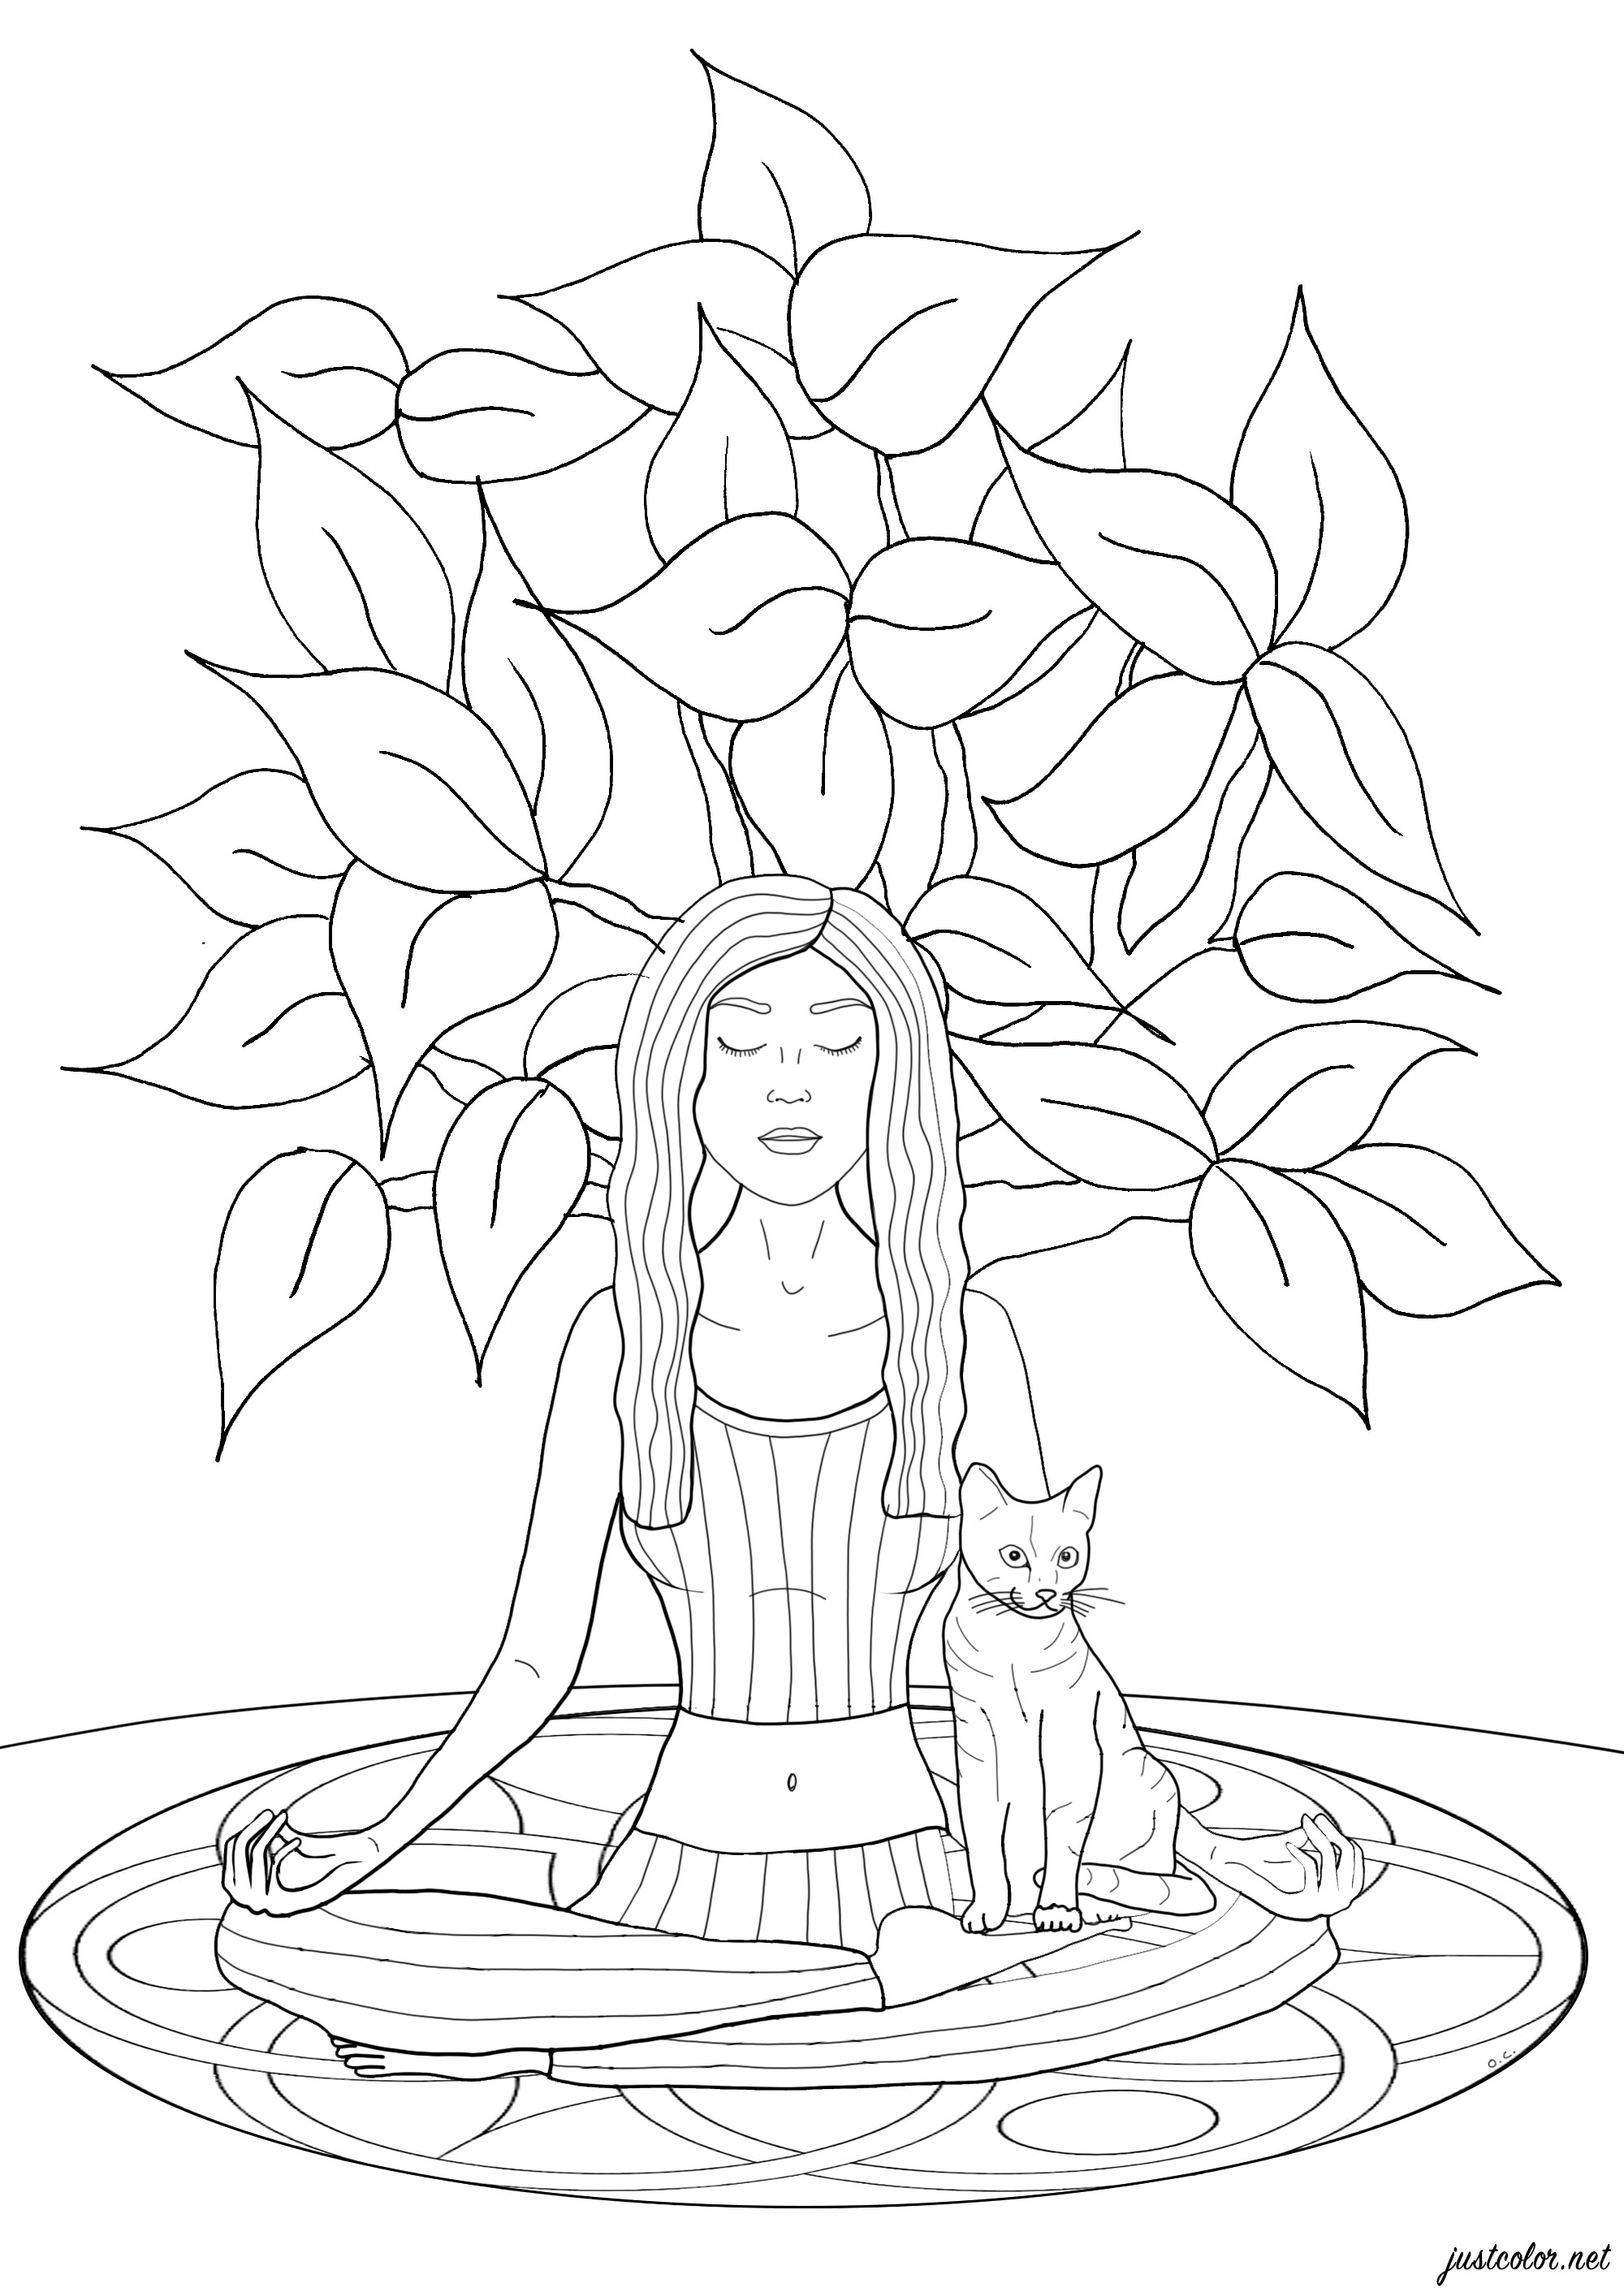 Woman doing yoga with her cat ... A tree grows behind her: the power of meditation?, Artist : Olivier